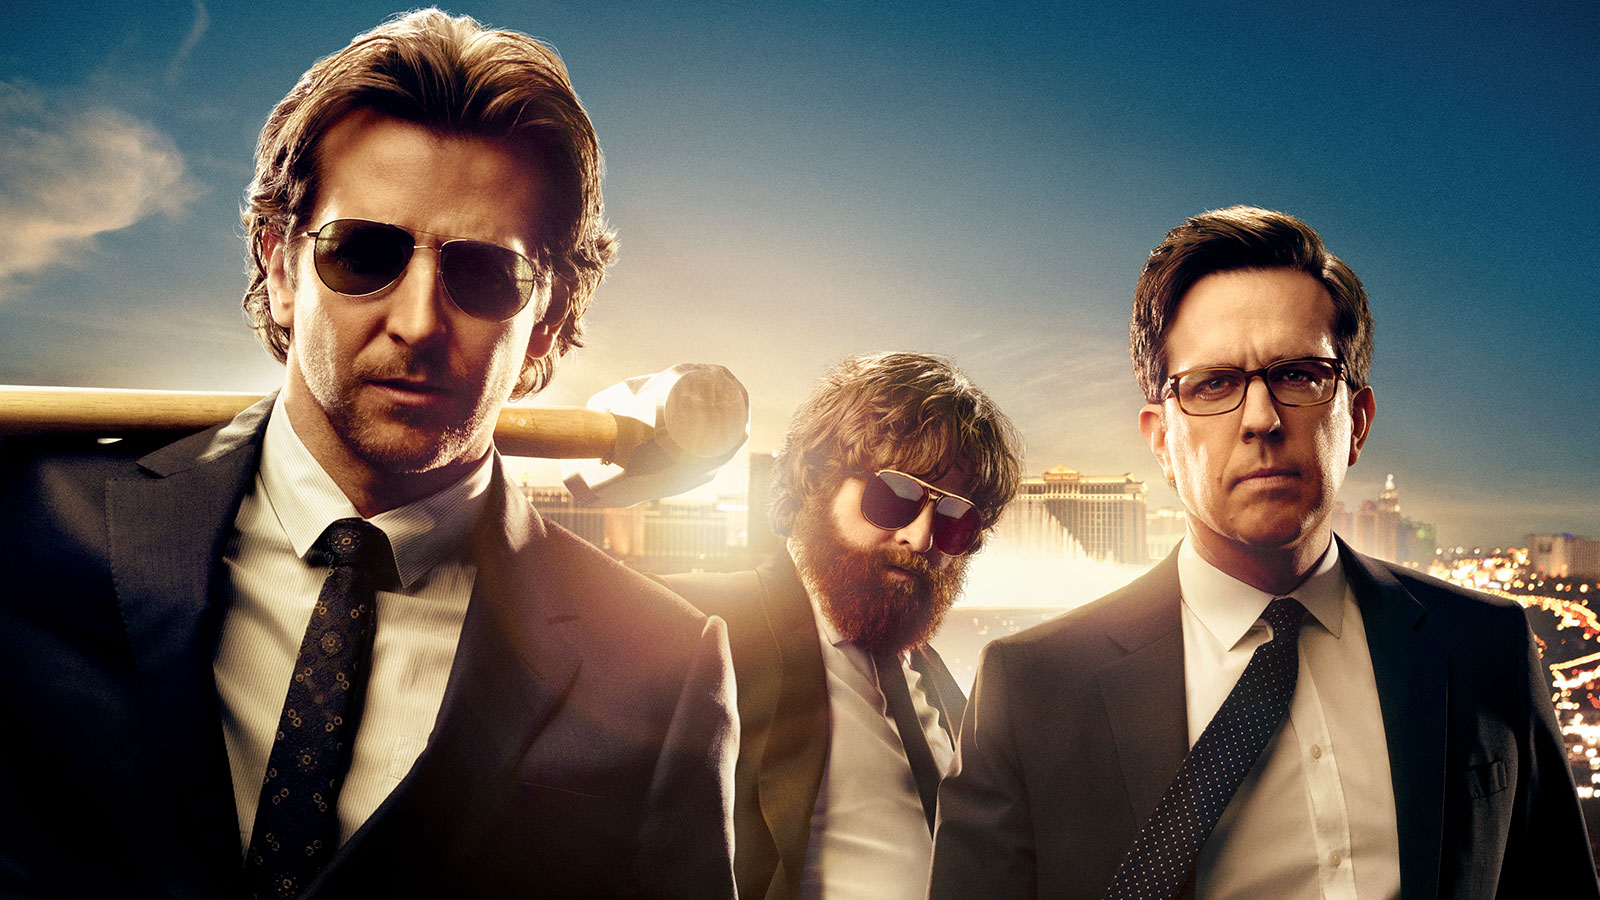 Nice Images Collection: The Hangover Desktop Wallpapers